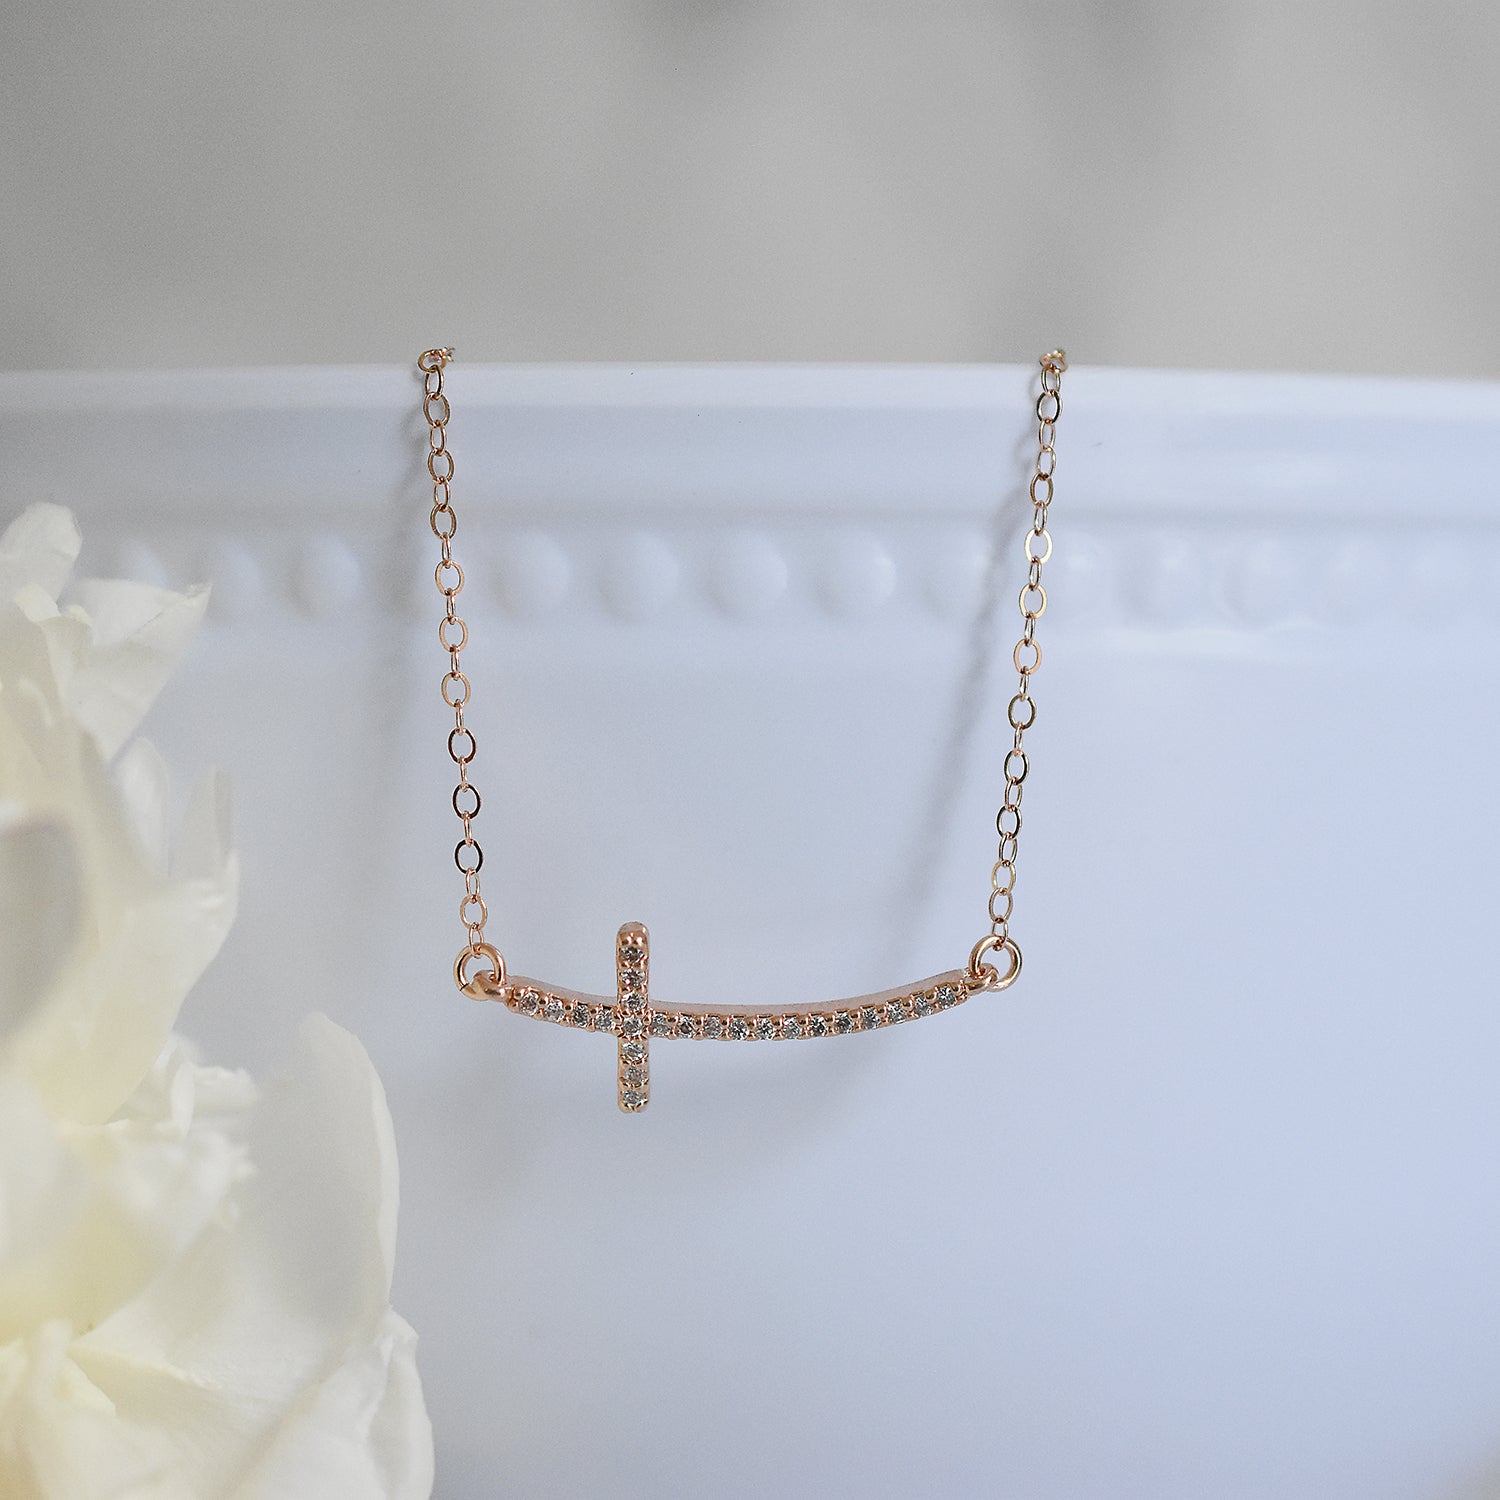 Buy Rose Gold Filled Cross Necklace Small Tiny Dainty Crystal Pendant Women  Quality Silver Little Girls Necklaces Delicate Jewelry Gift Online in India  - Etsy